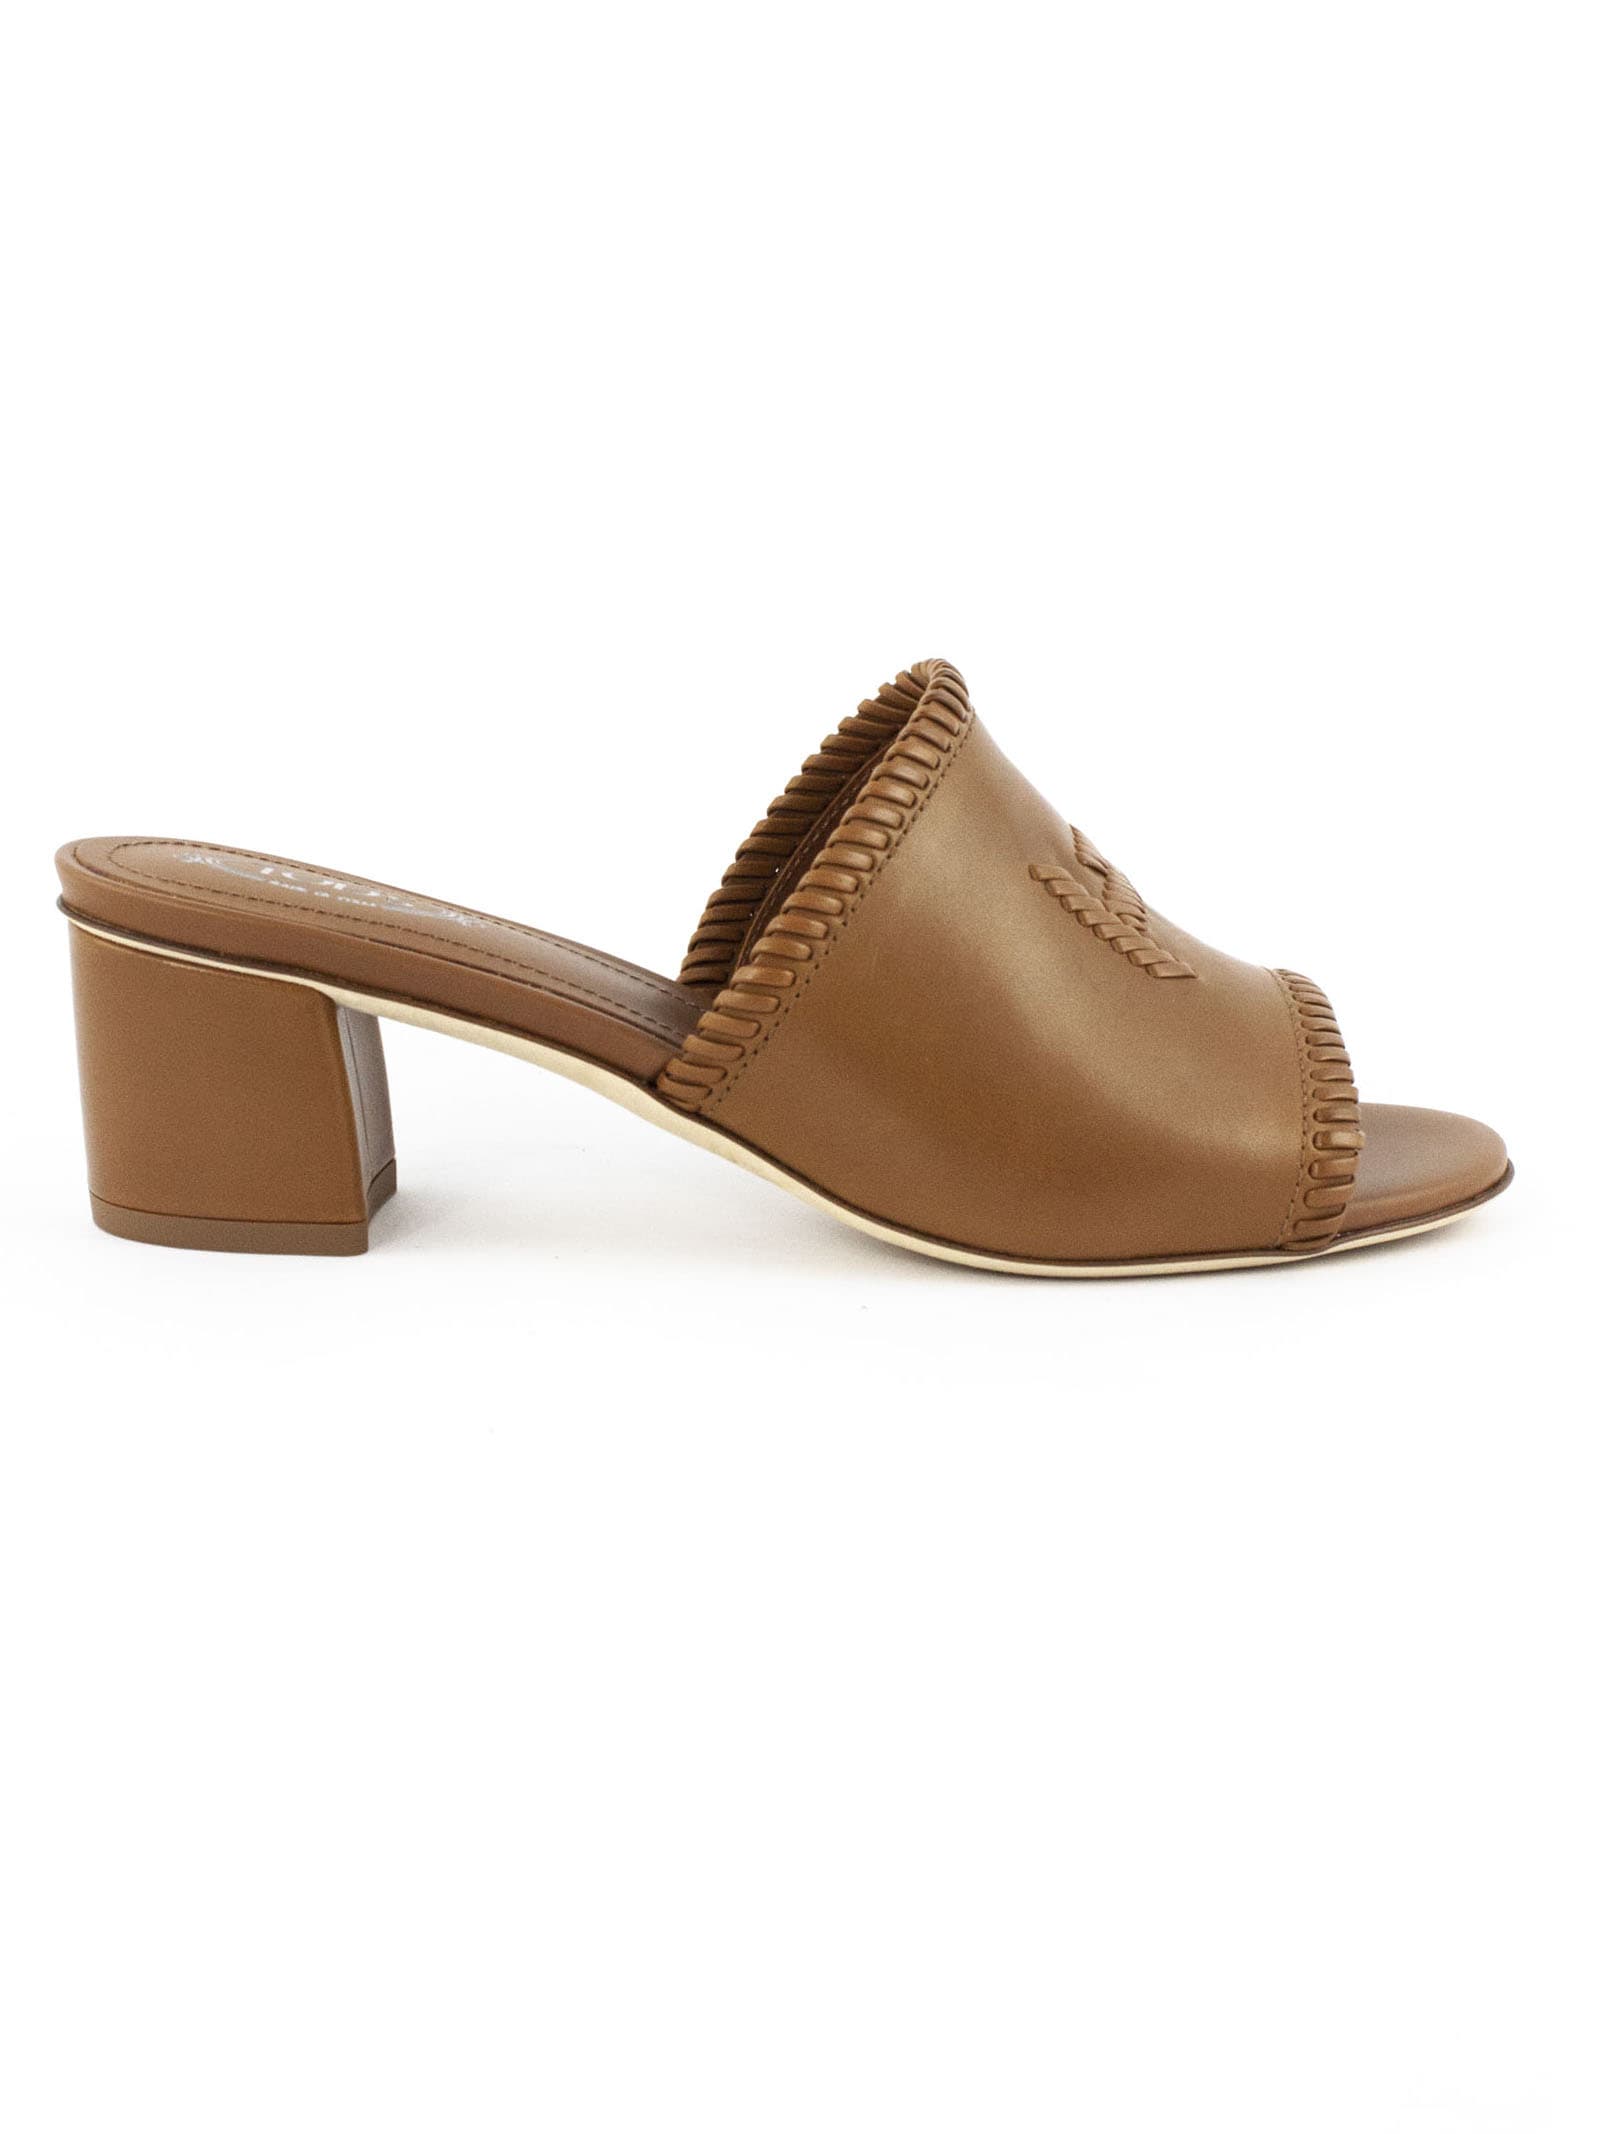 TOD'S SANDALS IN BROWN LEATHER,11317638